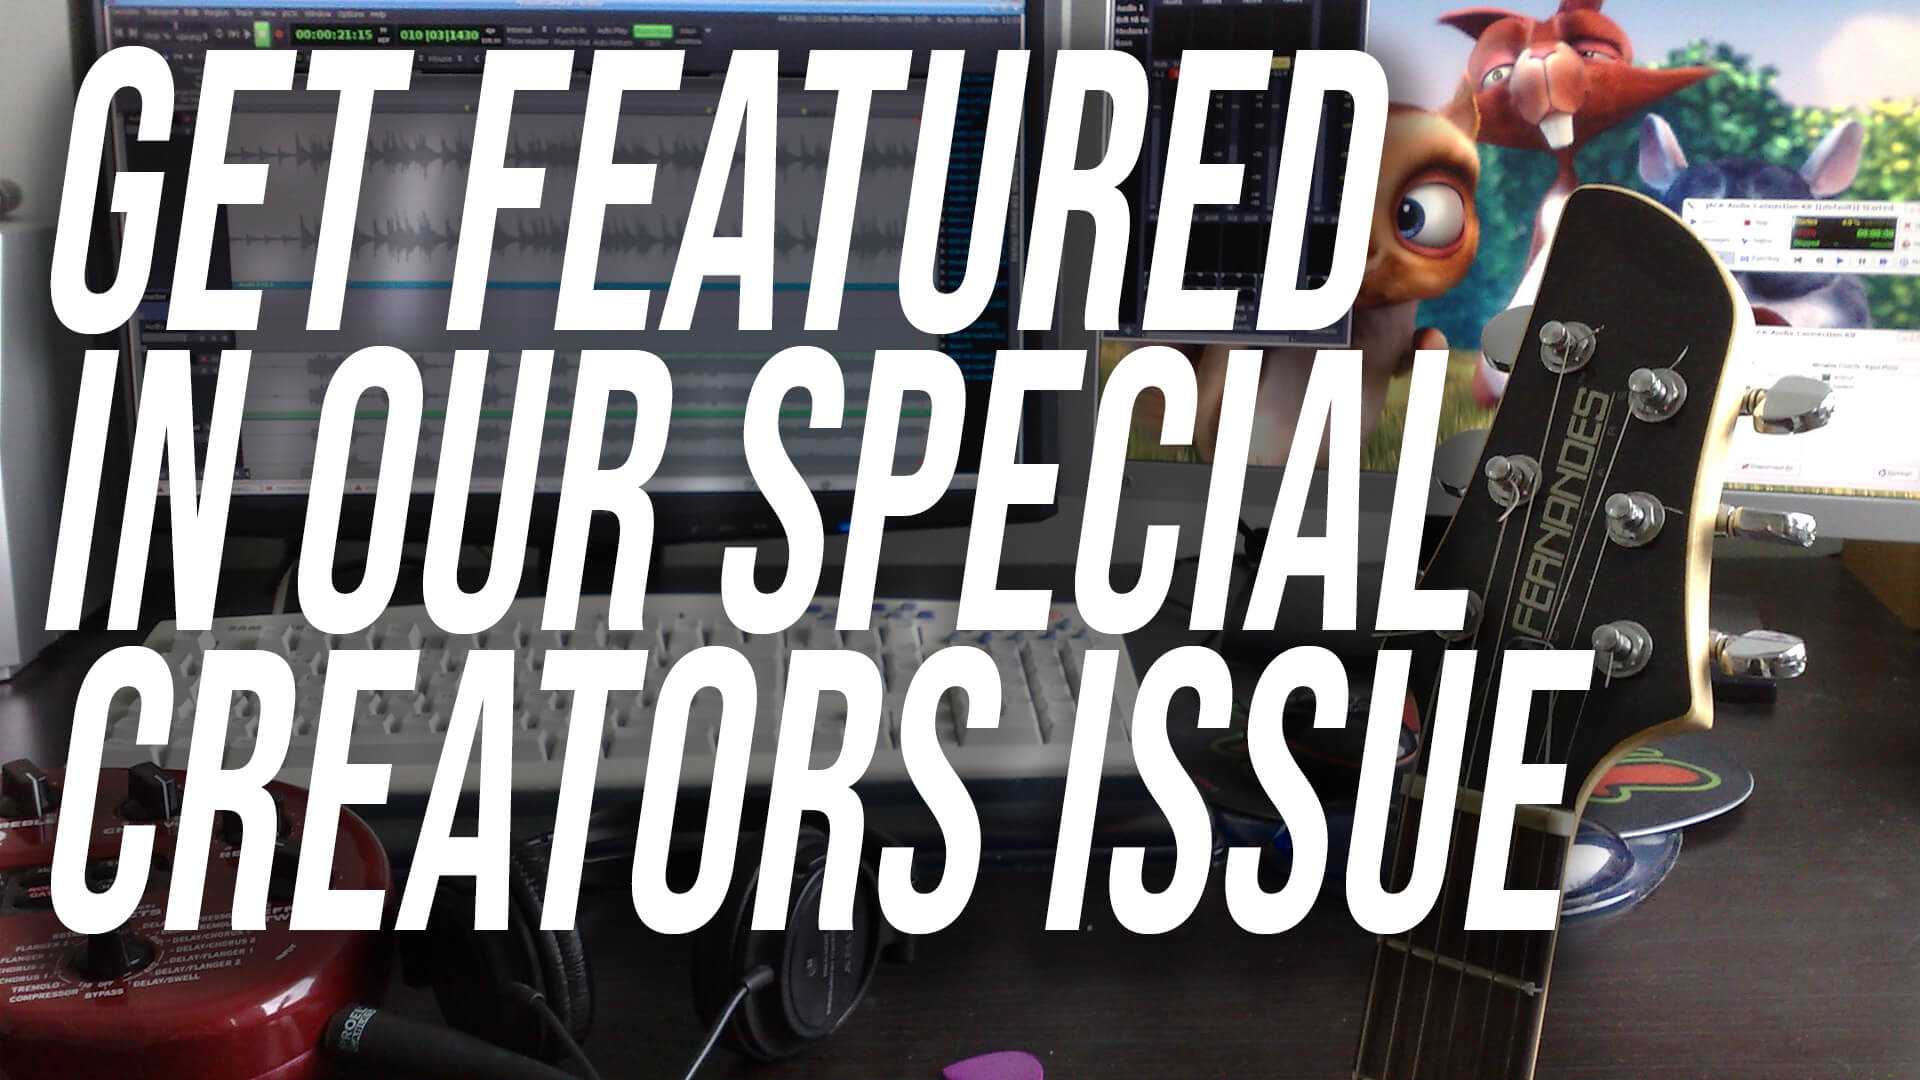 Contribute to Performer’s Special Mobile Creators Issue!